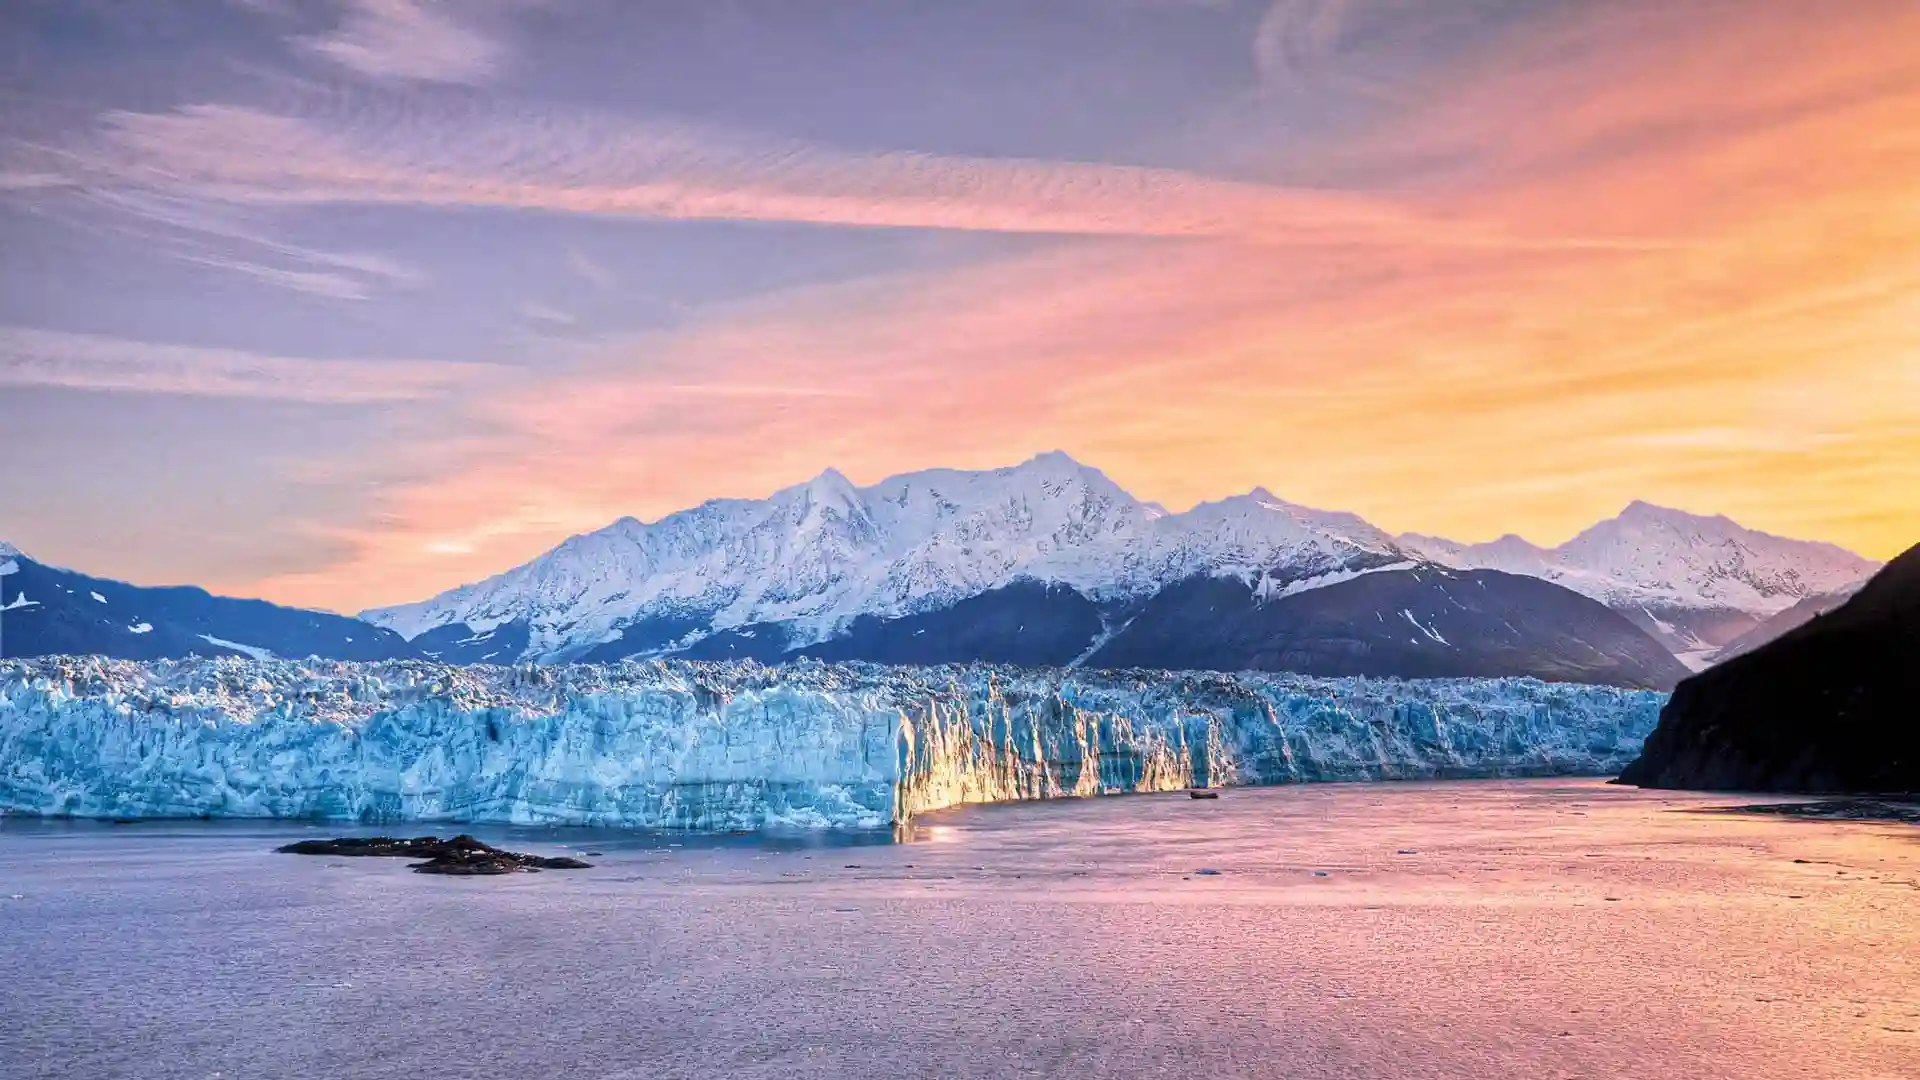 Sunlit skies over Alaska glacier and snowcapped mountains.